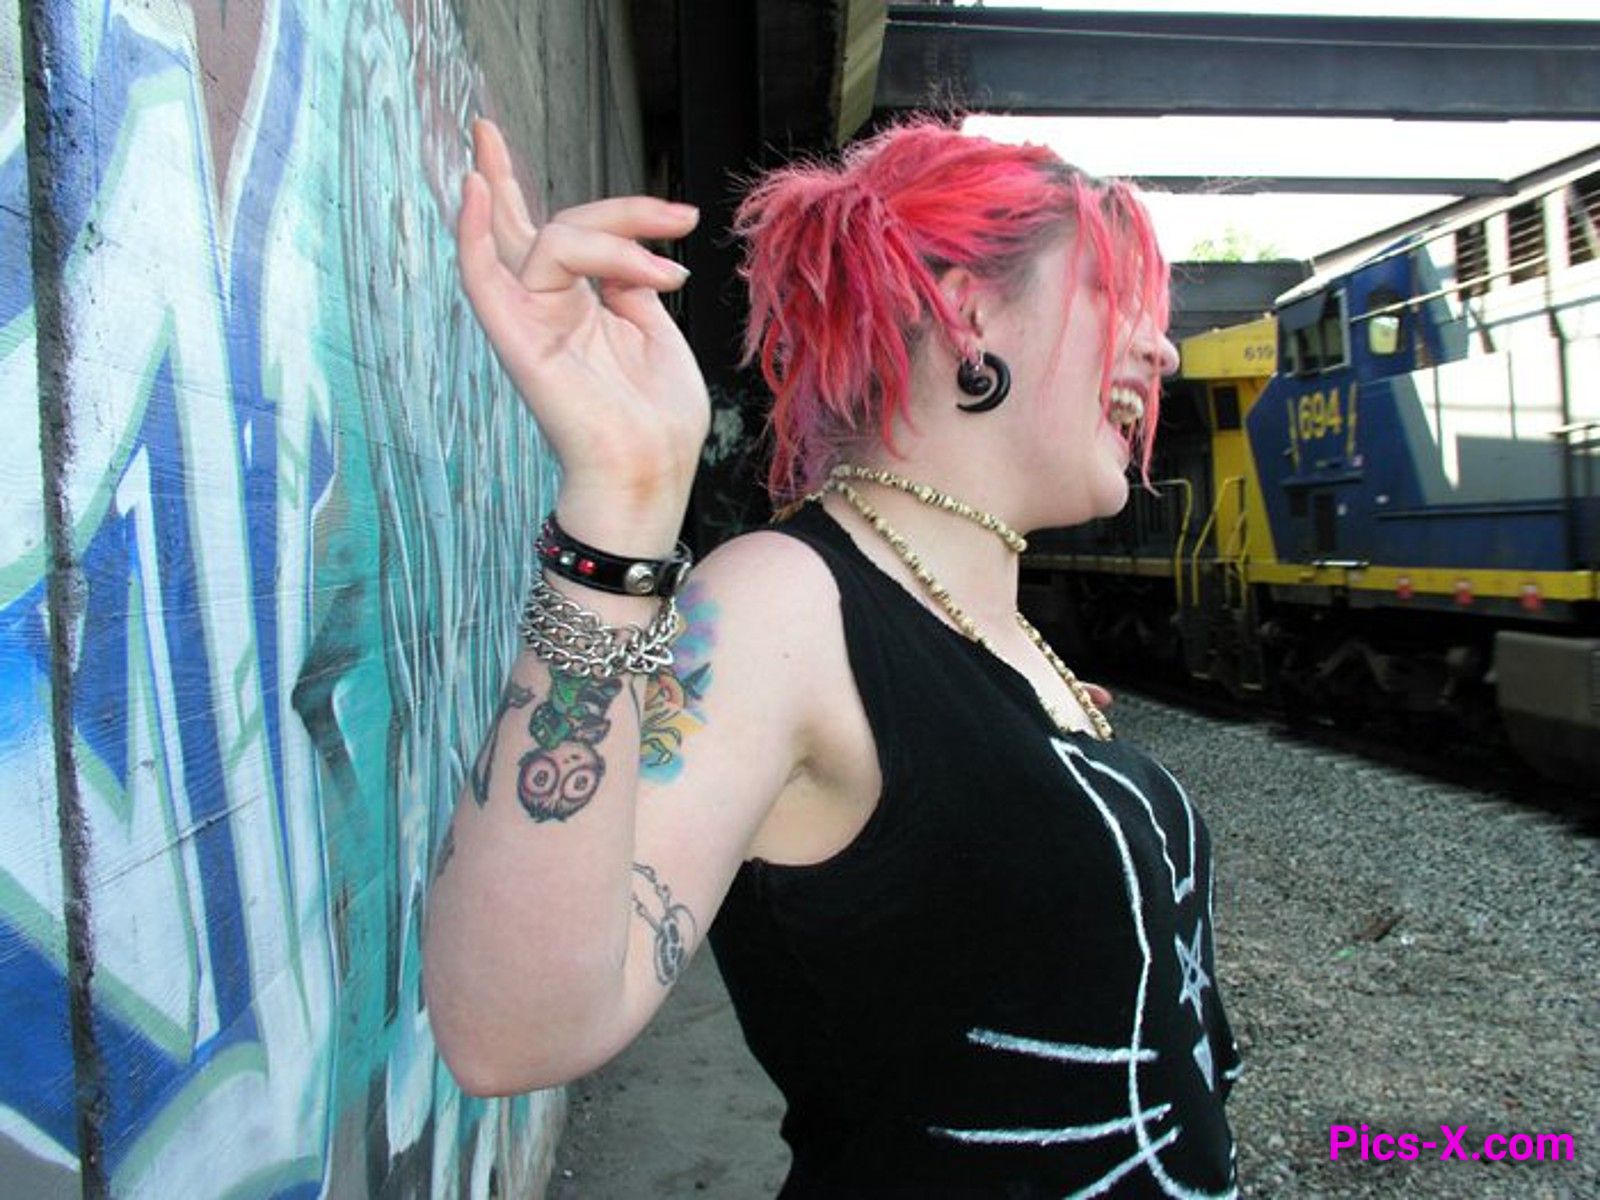 Pink haired goth babe posing on some train tracks - Punk Rock Girlfriend - Image 12